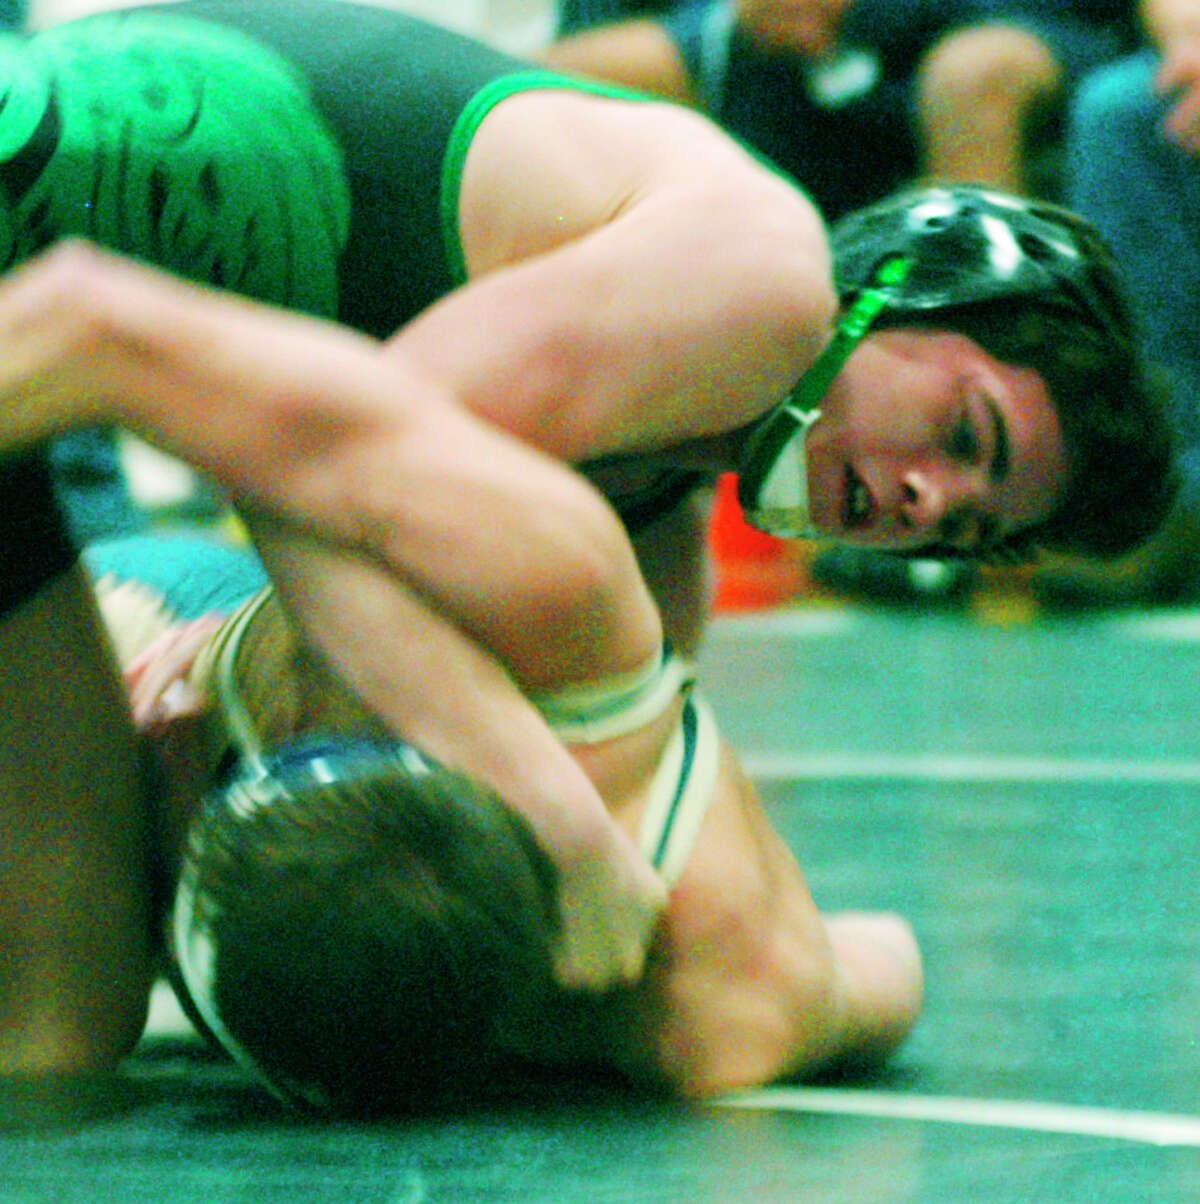 The highly skilled Kyle Lindner of the Green Wave dispatches Joey Briganti of Newington at 1:07 of their 120-pound semifinal match during the New Milford High School wrestling invitational at NMHS, Jan. 17, 2015.